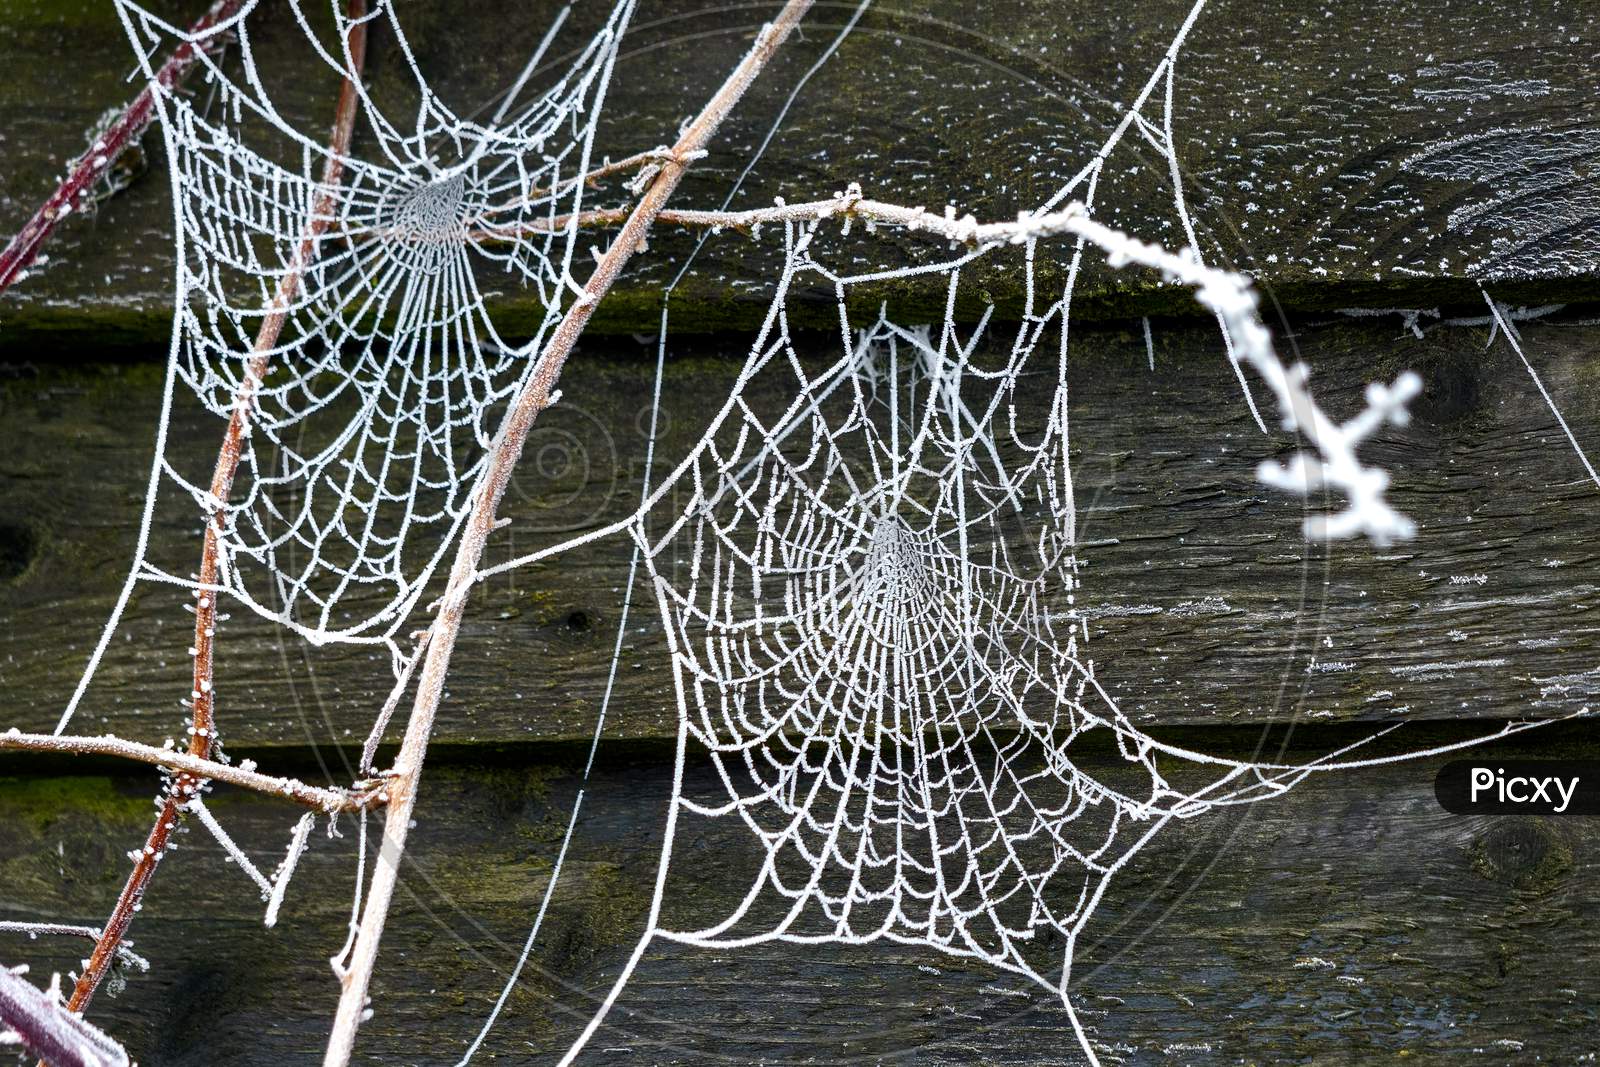 Spiders Web Glistening With Hoar Frost On A Winters Morning